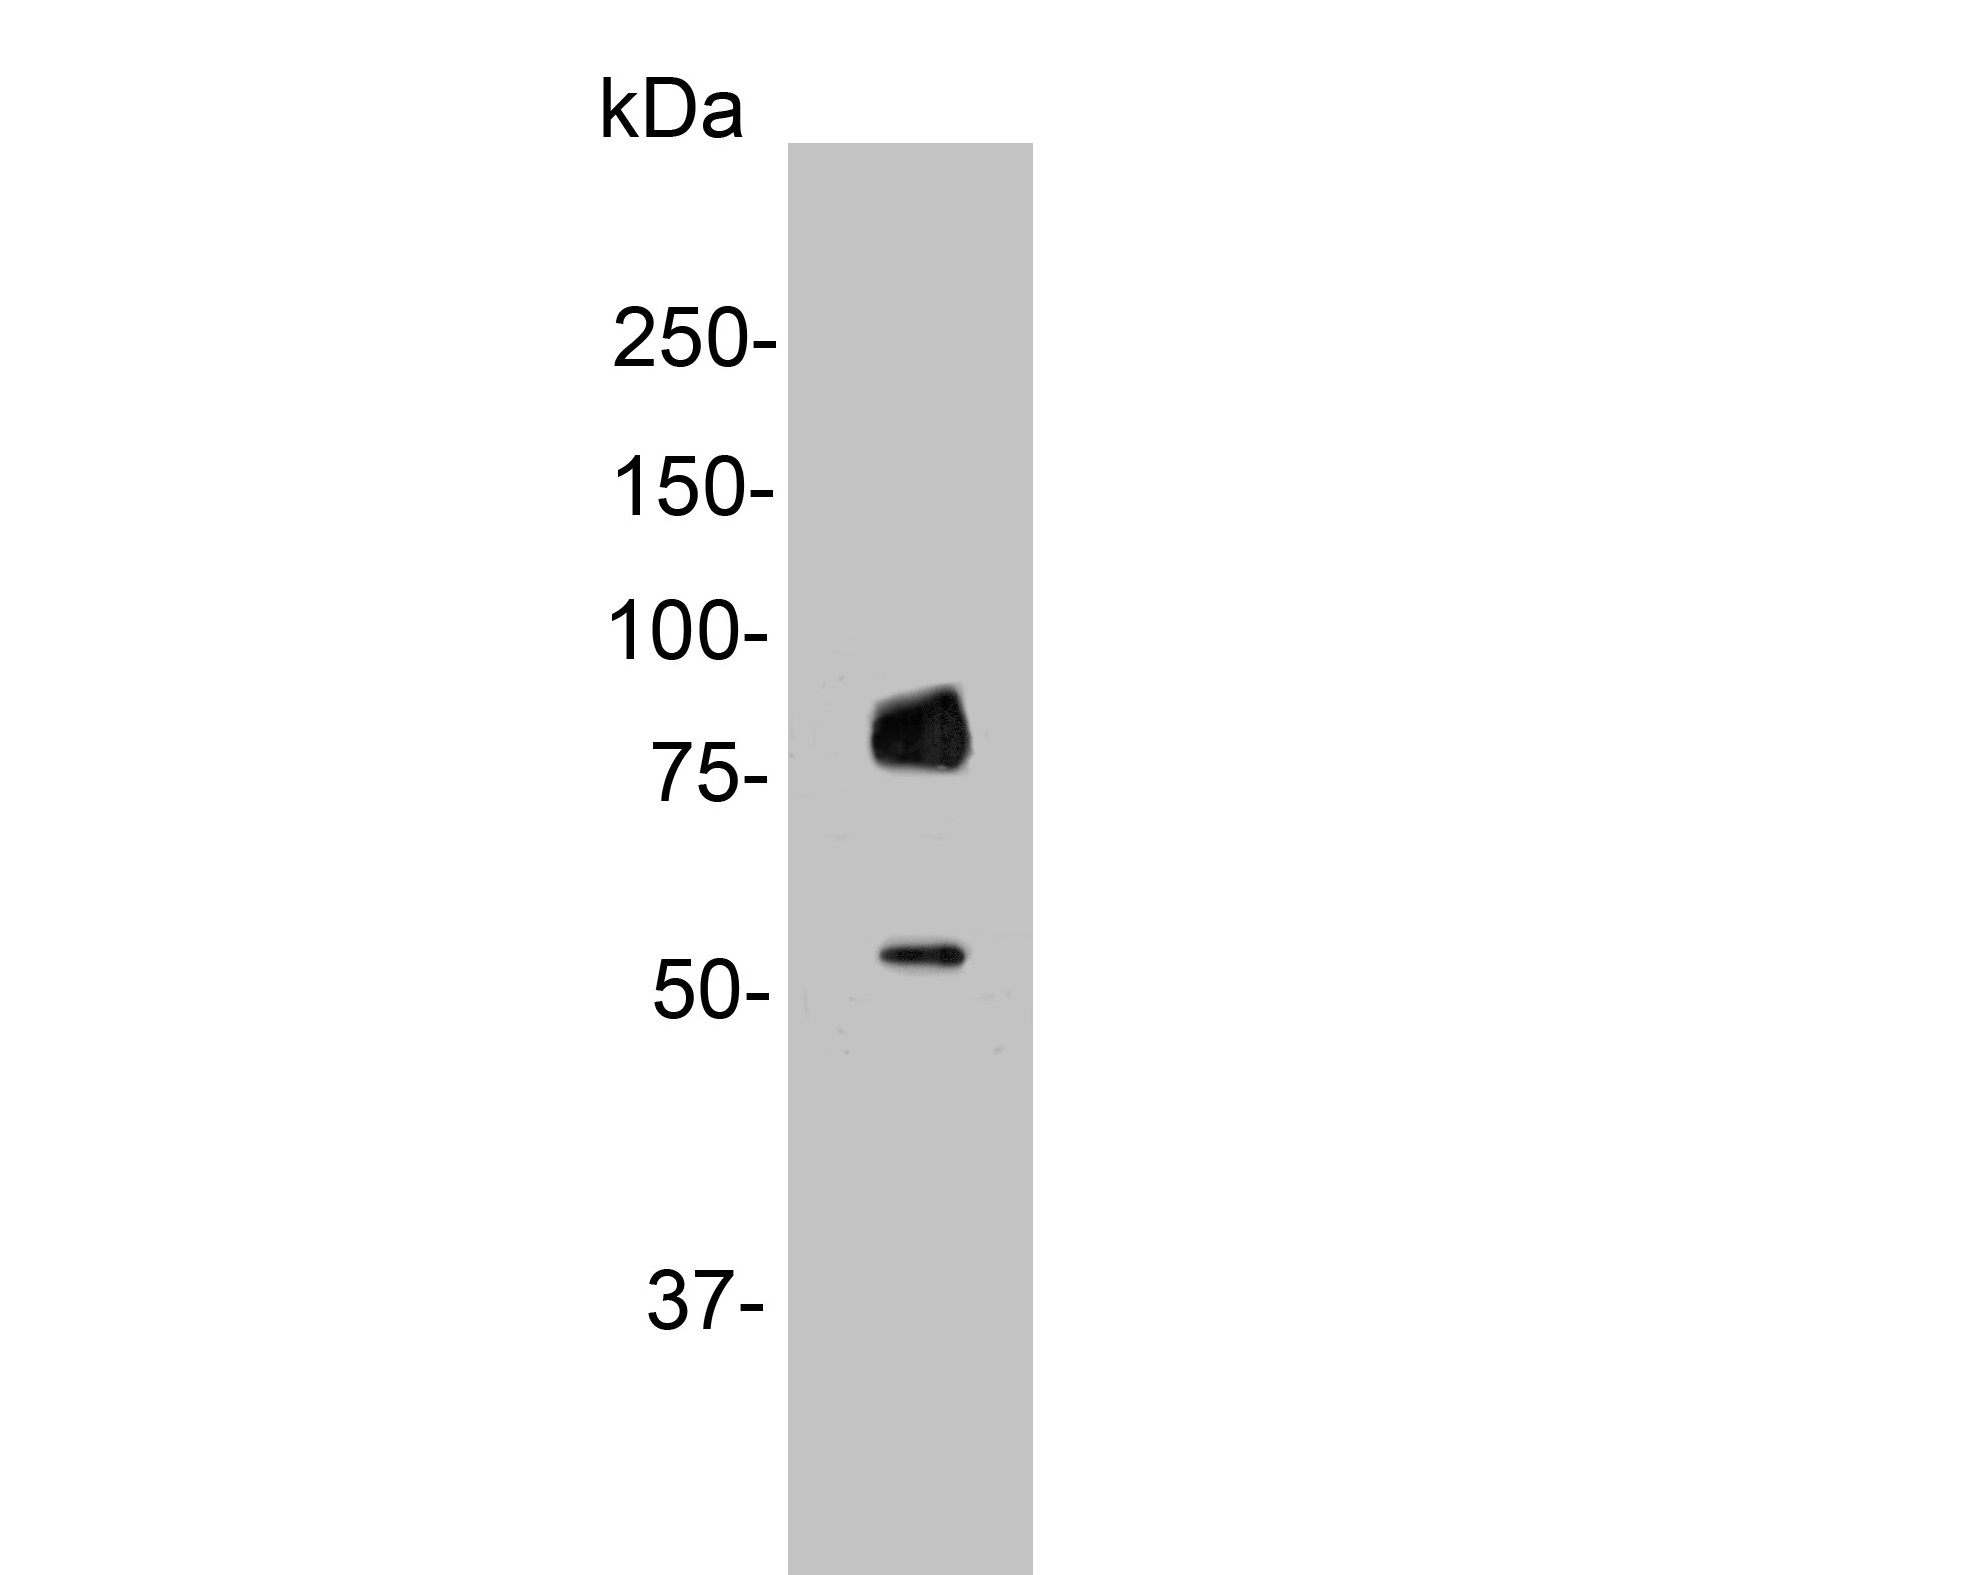 Western blot analysis of Gab2 on SHSY5Y cell lysate. Proteins were transferred to a PVDF membrane and blocked with 5% NFDM/TBST for 1 hour at room temperature. The primary antibody (HA500292, 1/500) was used in 5% NFDM/TBST at room temperature for 2 hours. Goat Anti-Rabbit IgG - HRP Secondary Antibody (HA1001) at 1:200,000 dilution was used for 1 hour at room temperature.